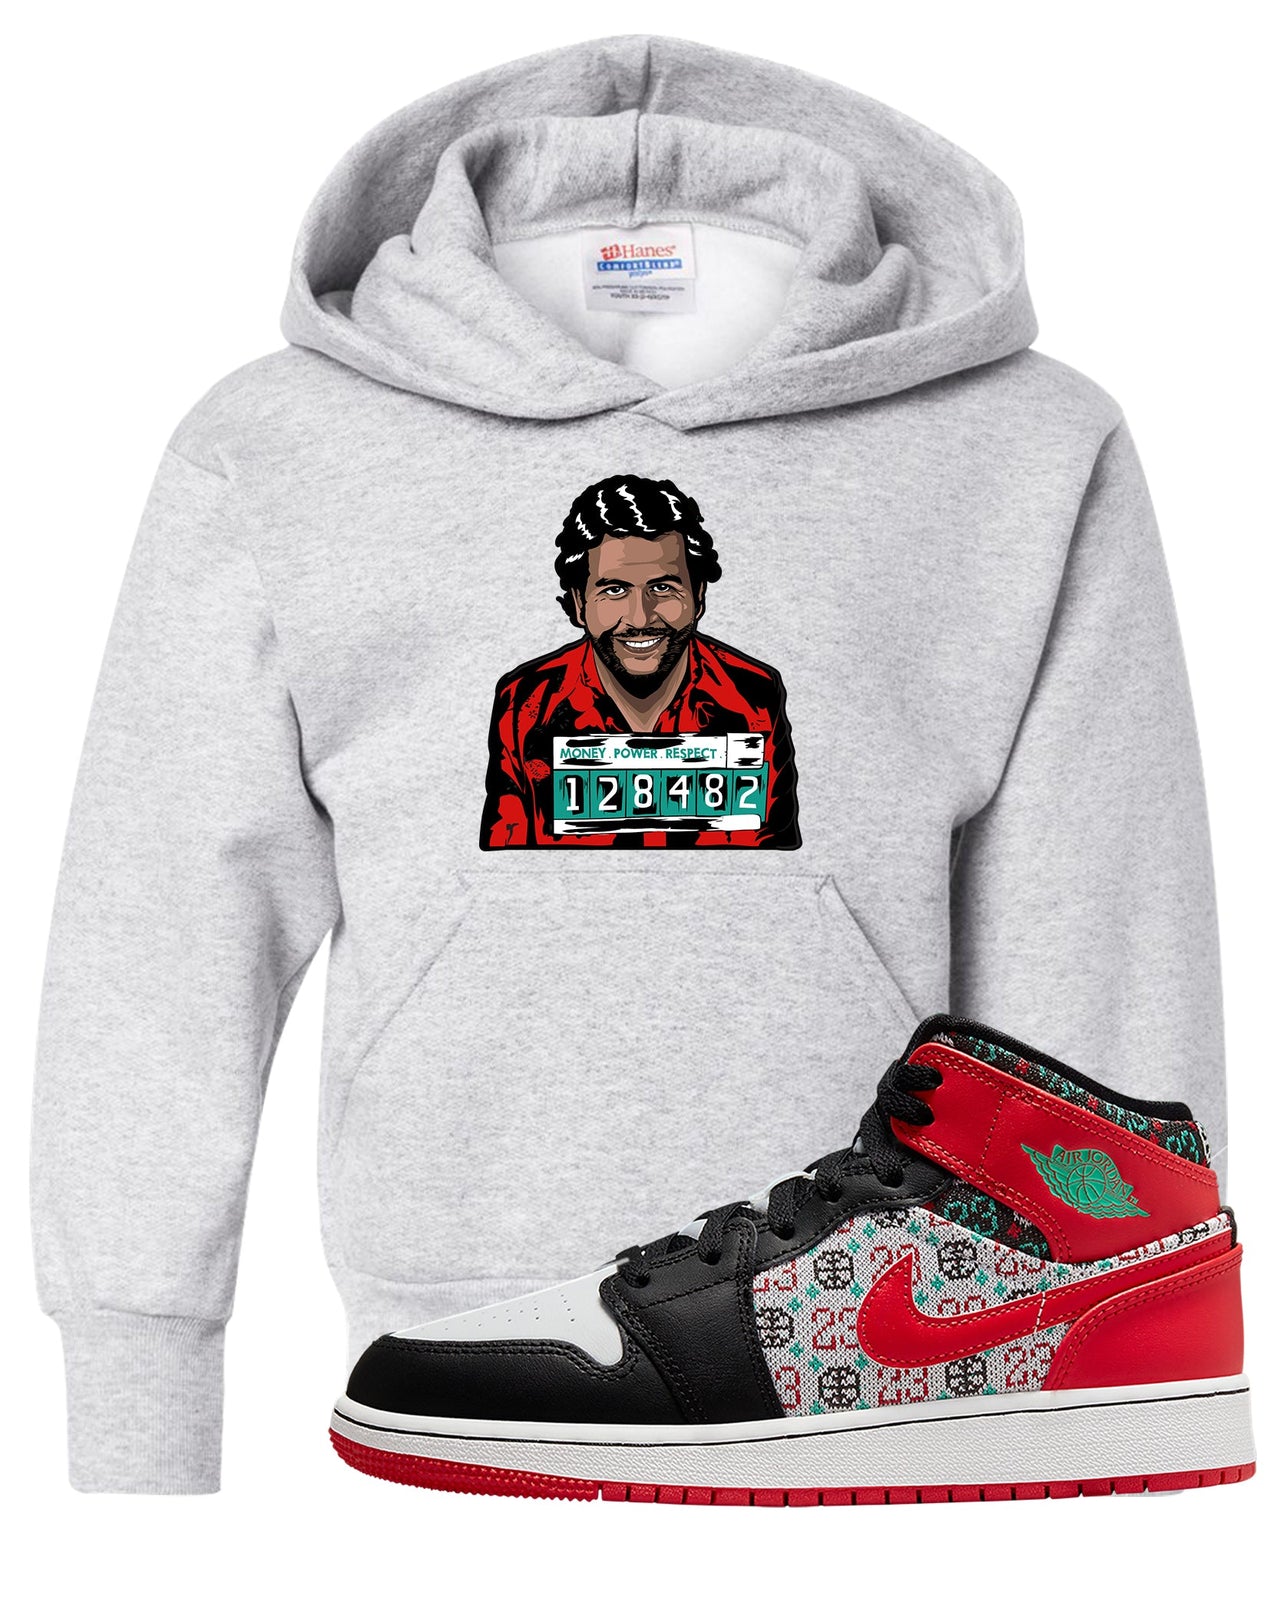 Ugly Sweater GS Mid 1s Kid's Hoodie | Escobar Illustration, Ash